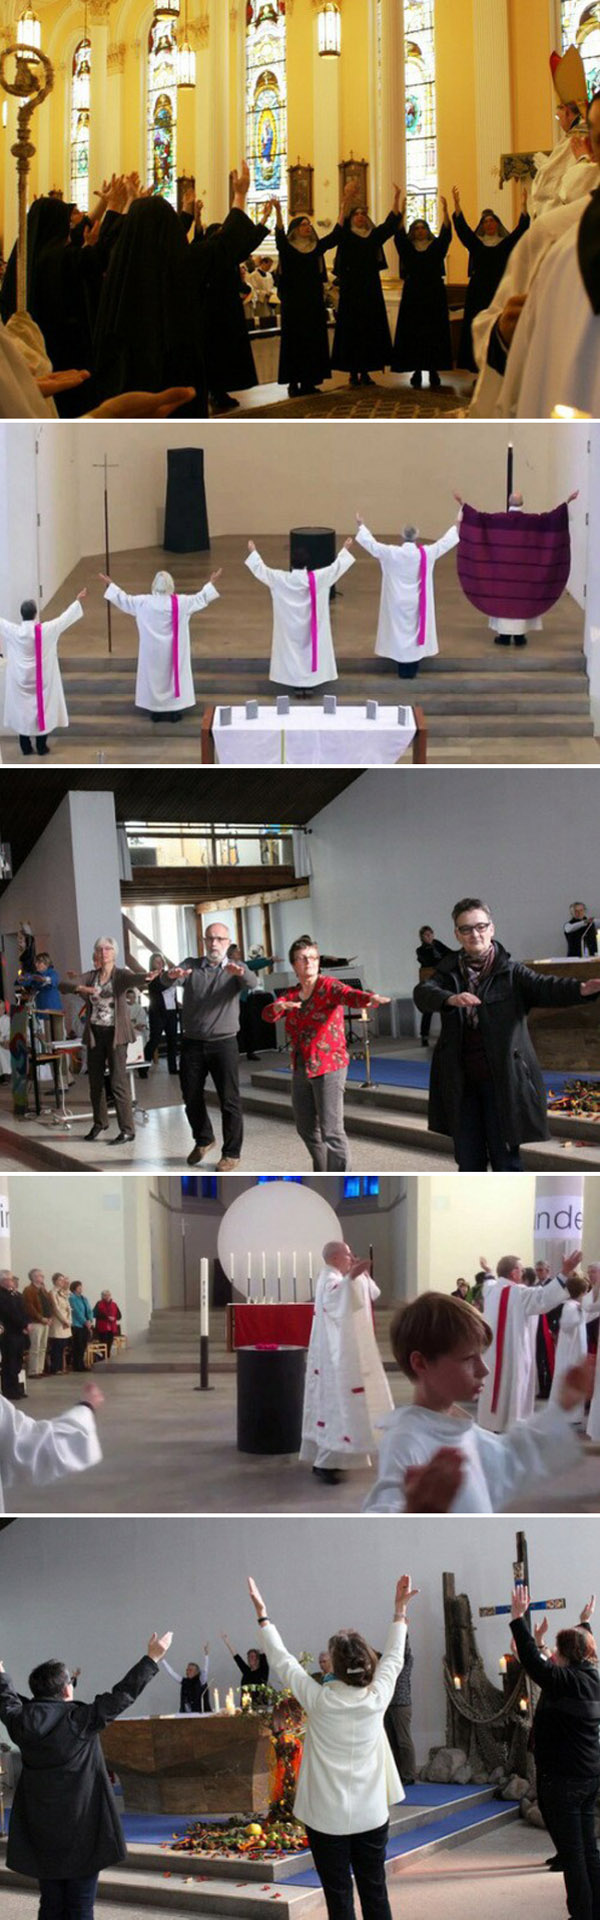 Liturgical dances in Germany 02